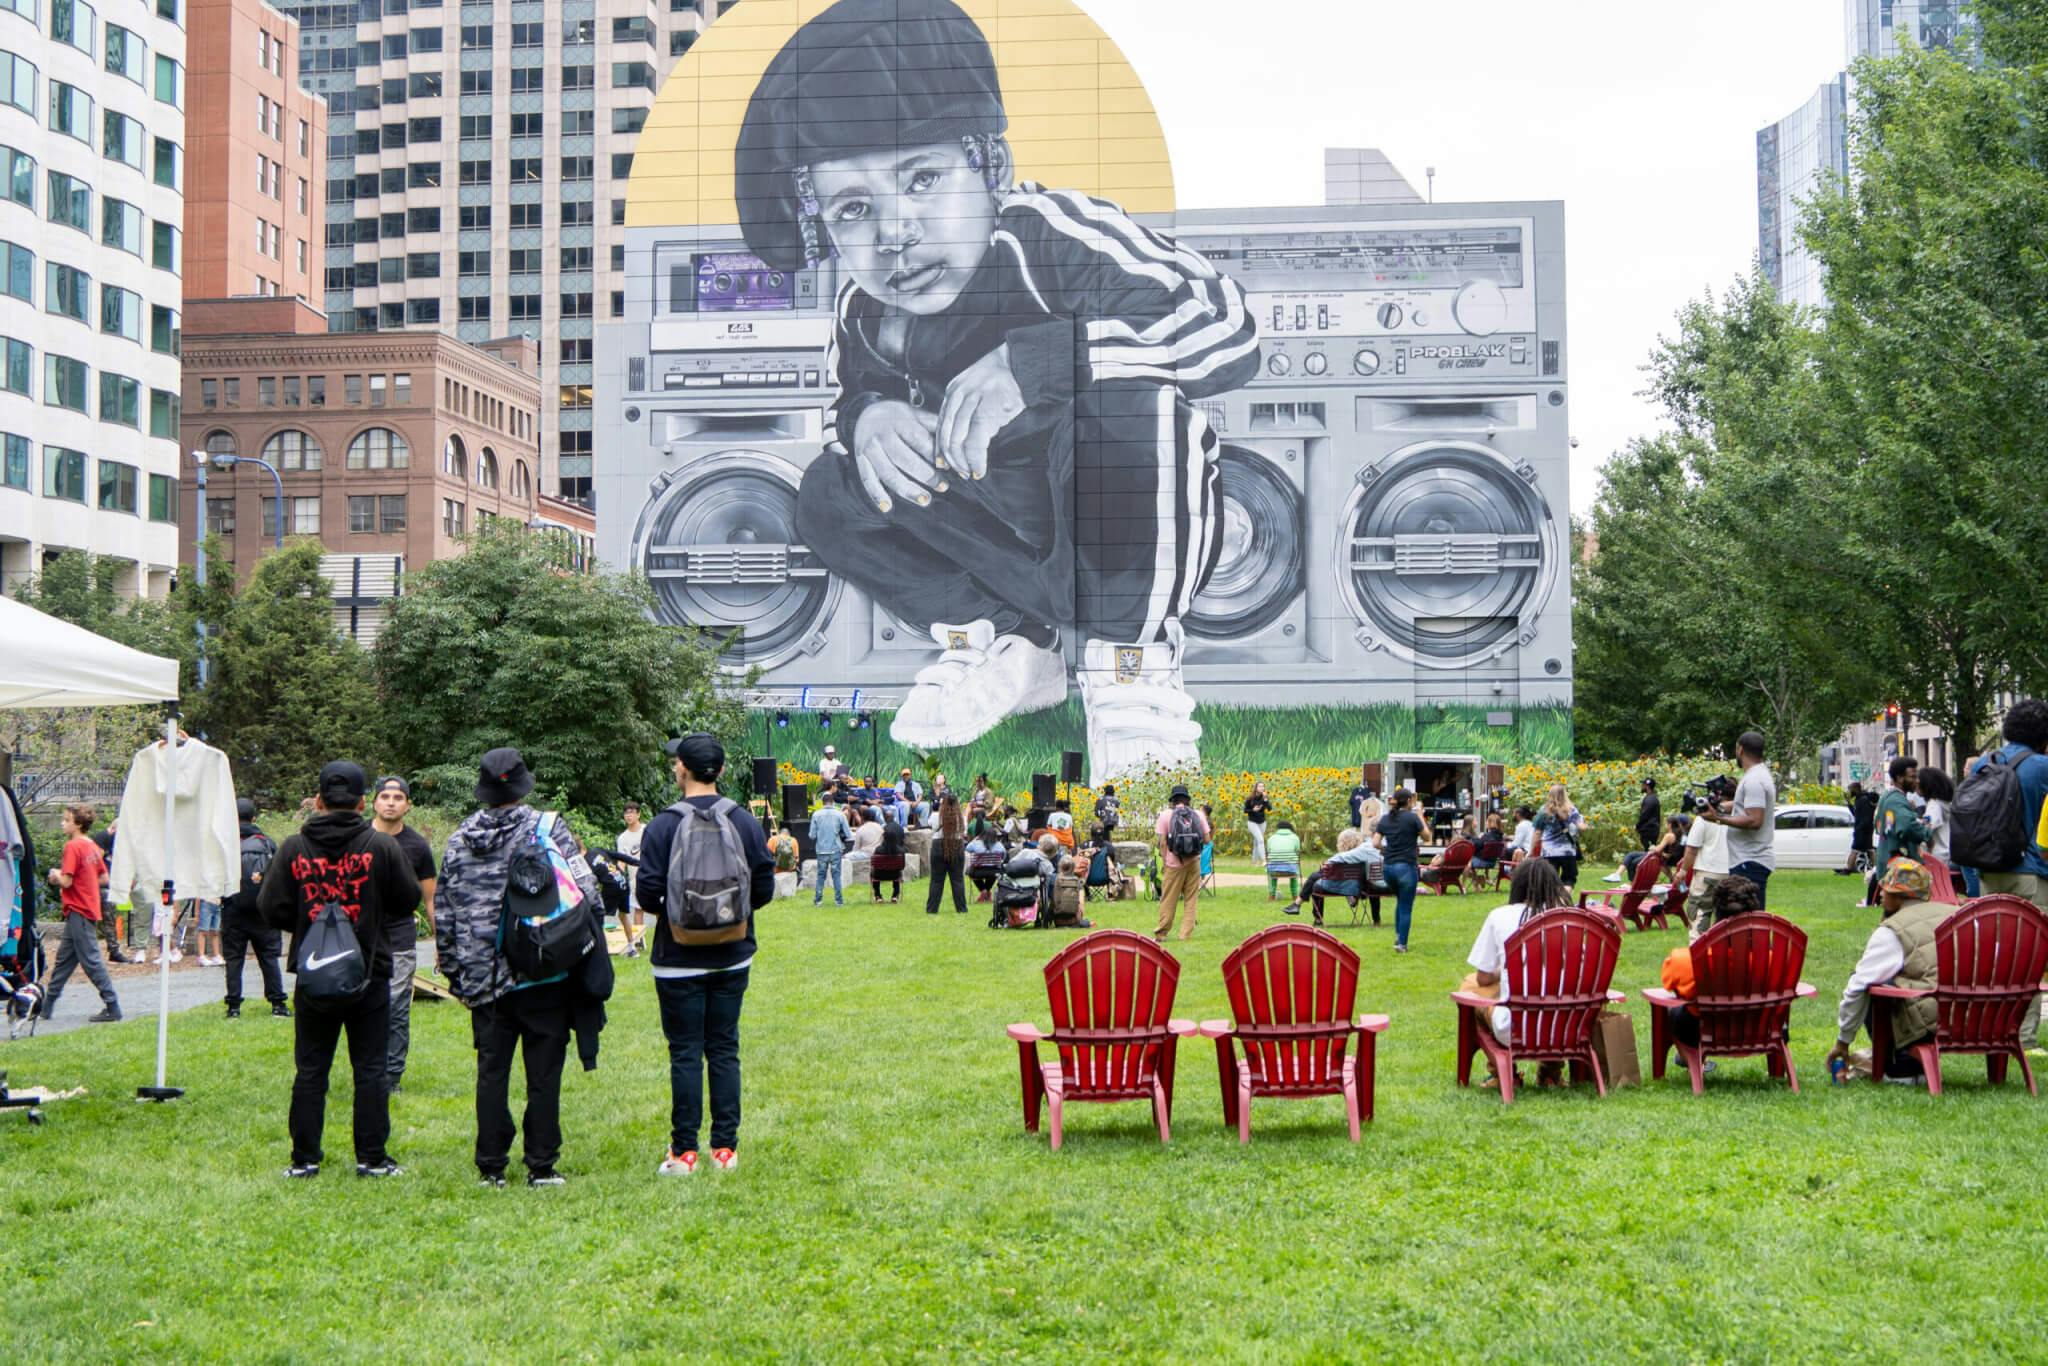 Image of “Sound In the City” event at the Rose Kennedy Greenway. People are standing and sitting on the grass in the foreground, and panelists sit in the background in front of Rob “ProBlak” Gibbs' "Breathe Life" mural